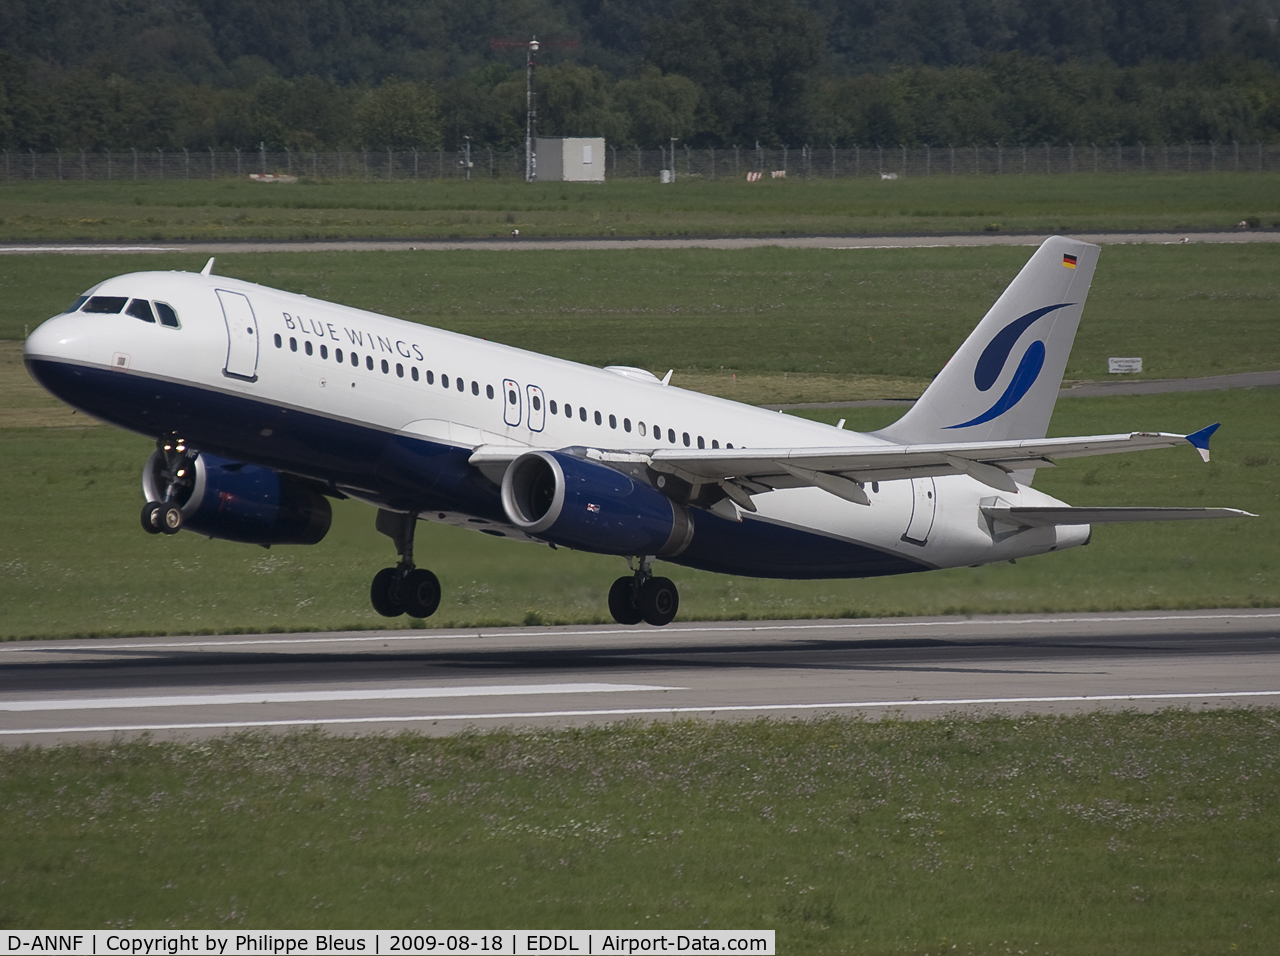 D-ANNF, 2001 Airbus A320-232 C/N 1650, Taking off from rwy 23L.